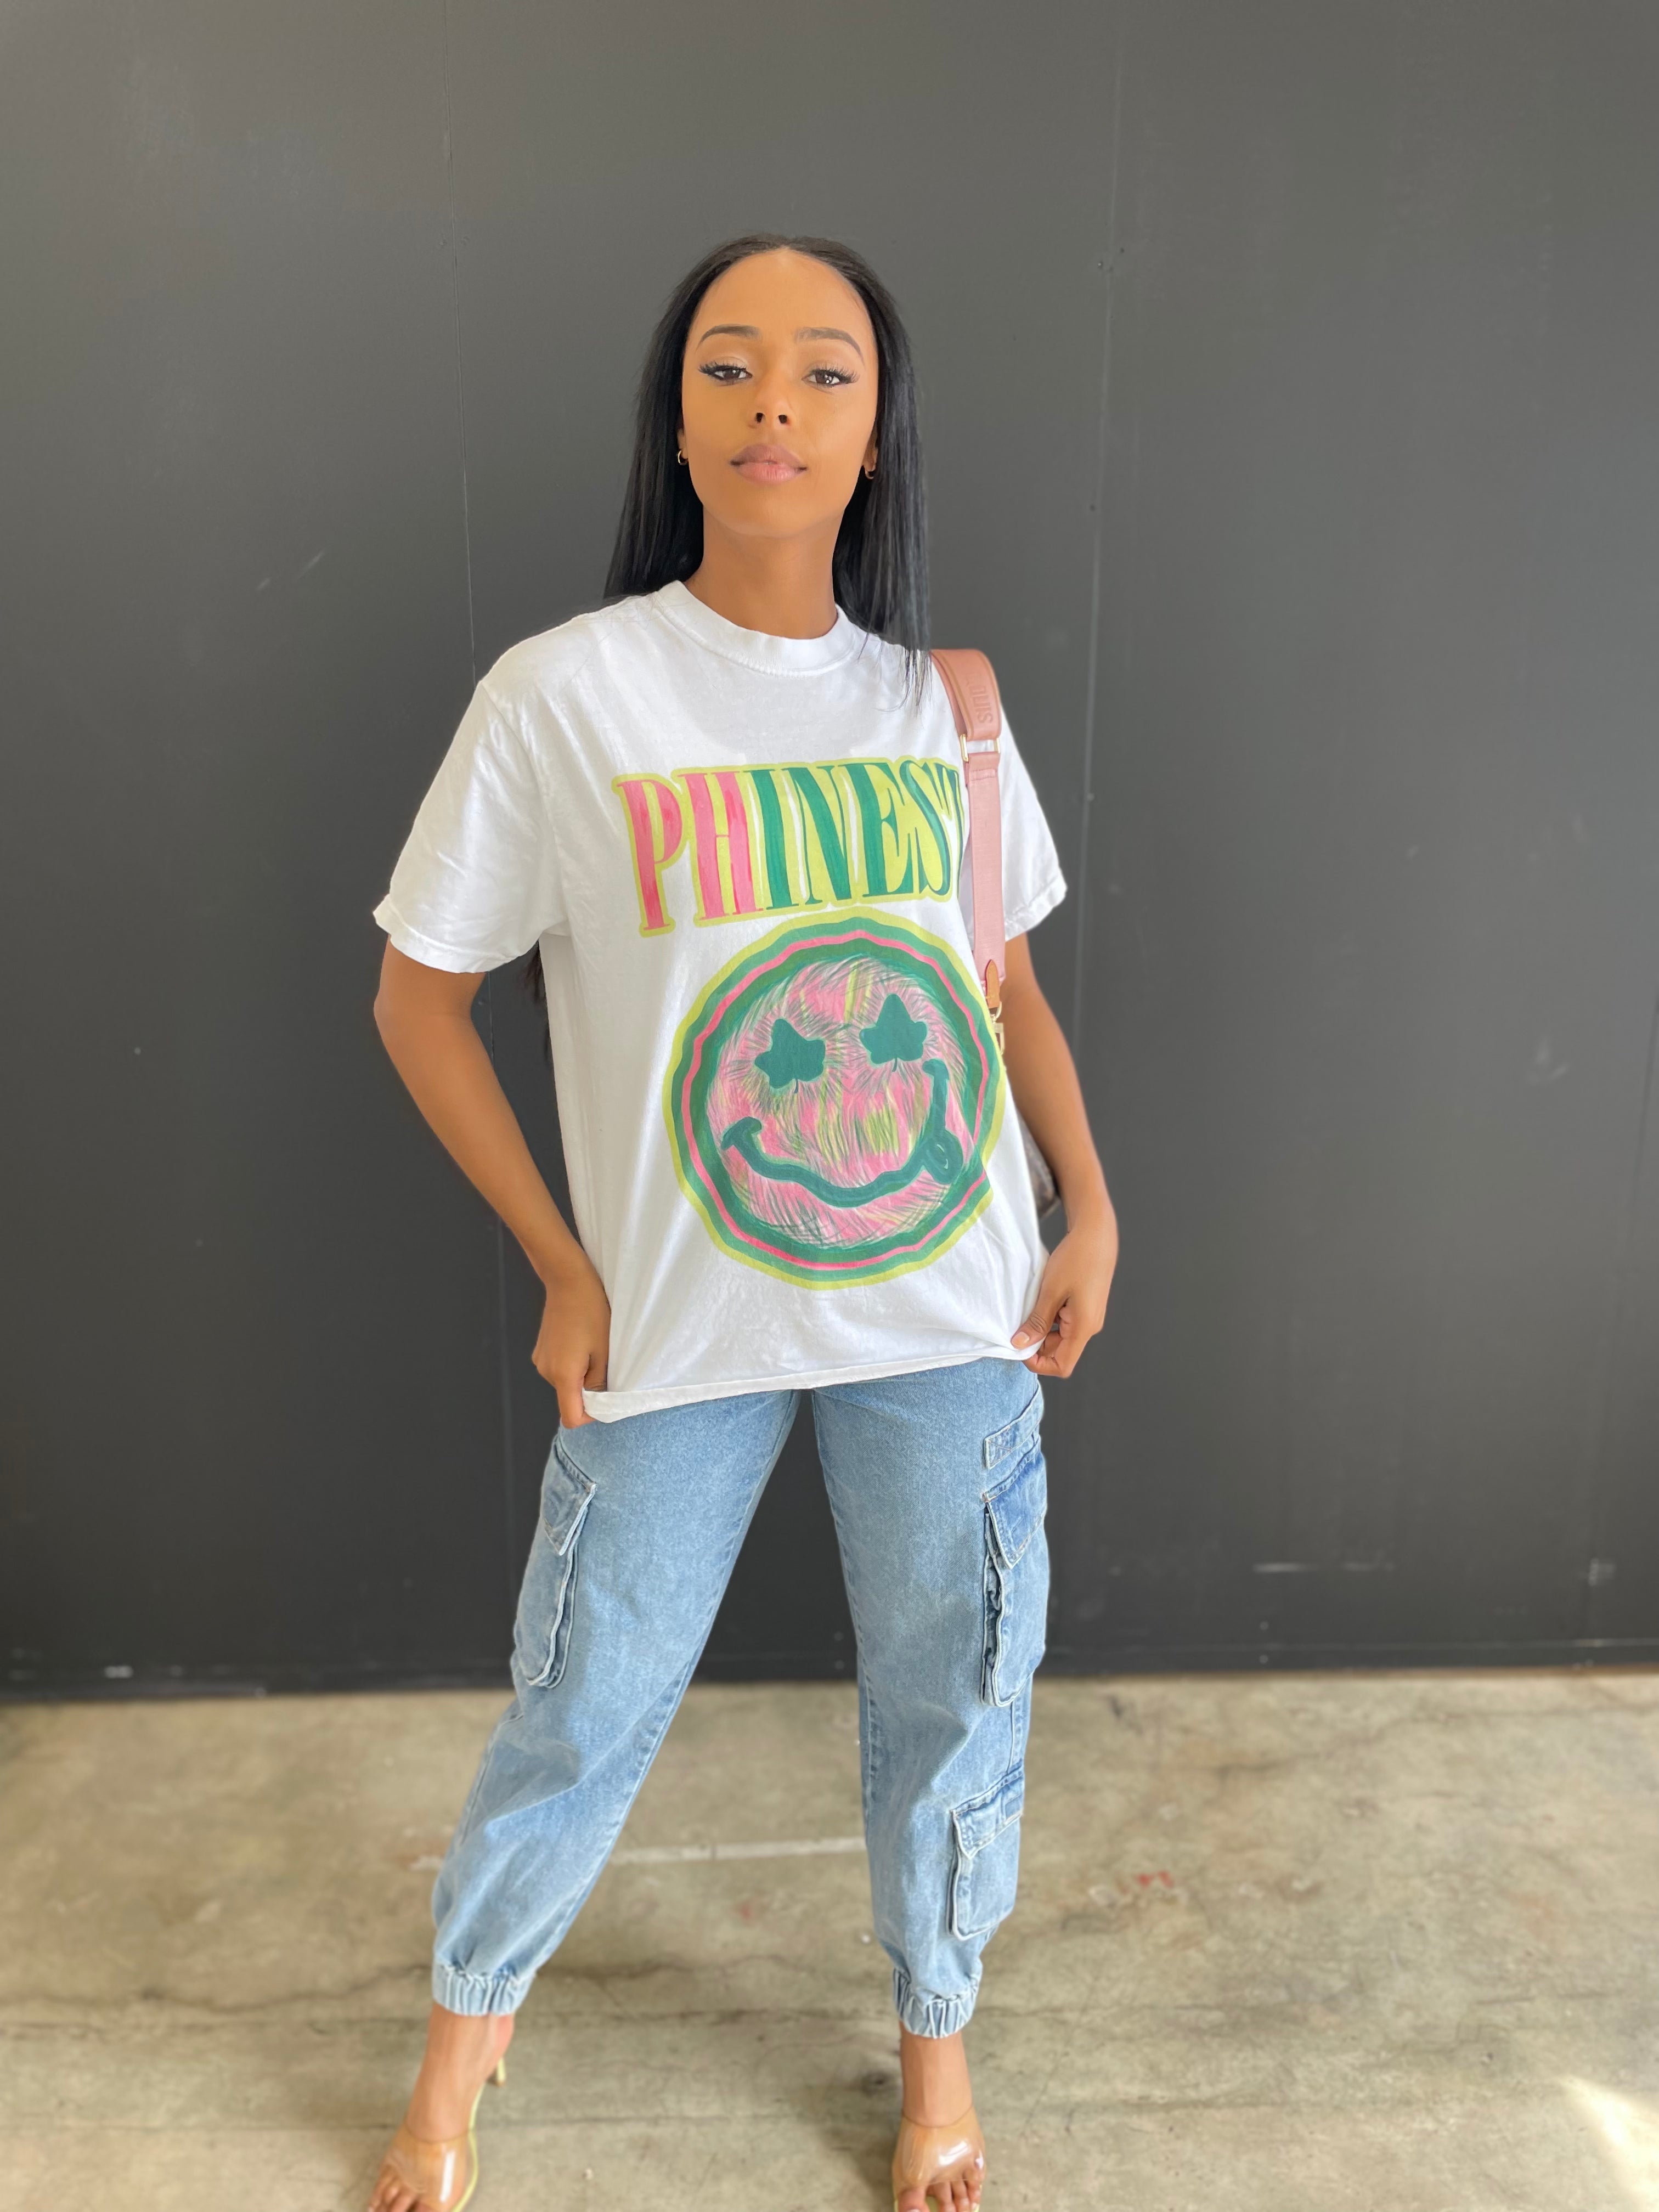 Phinest Smiley Tee in White (Ships on 4/24